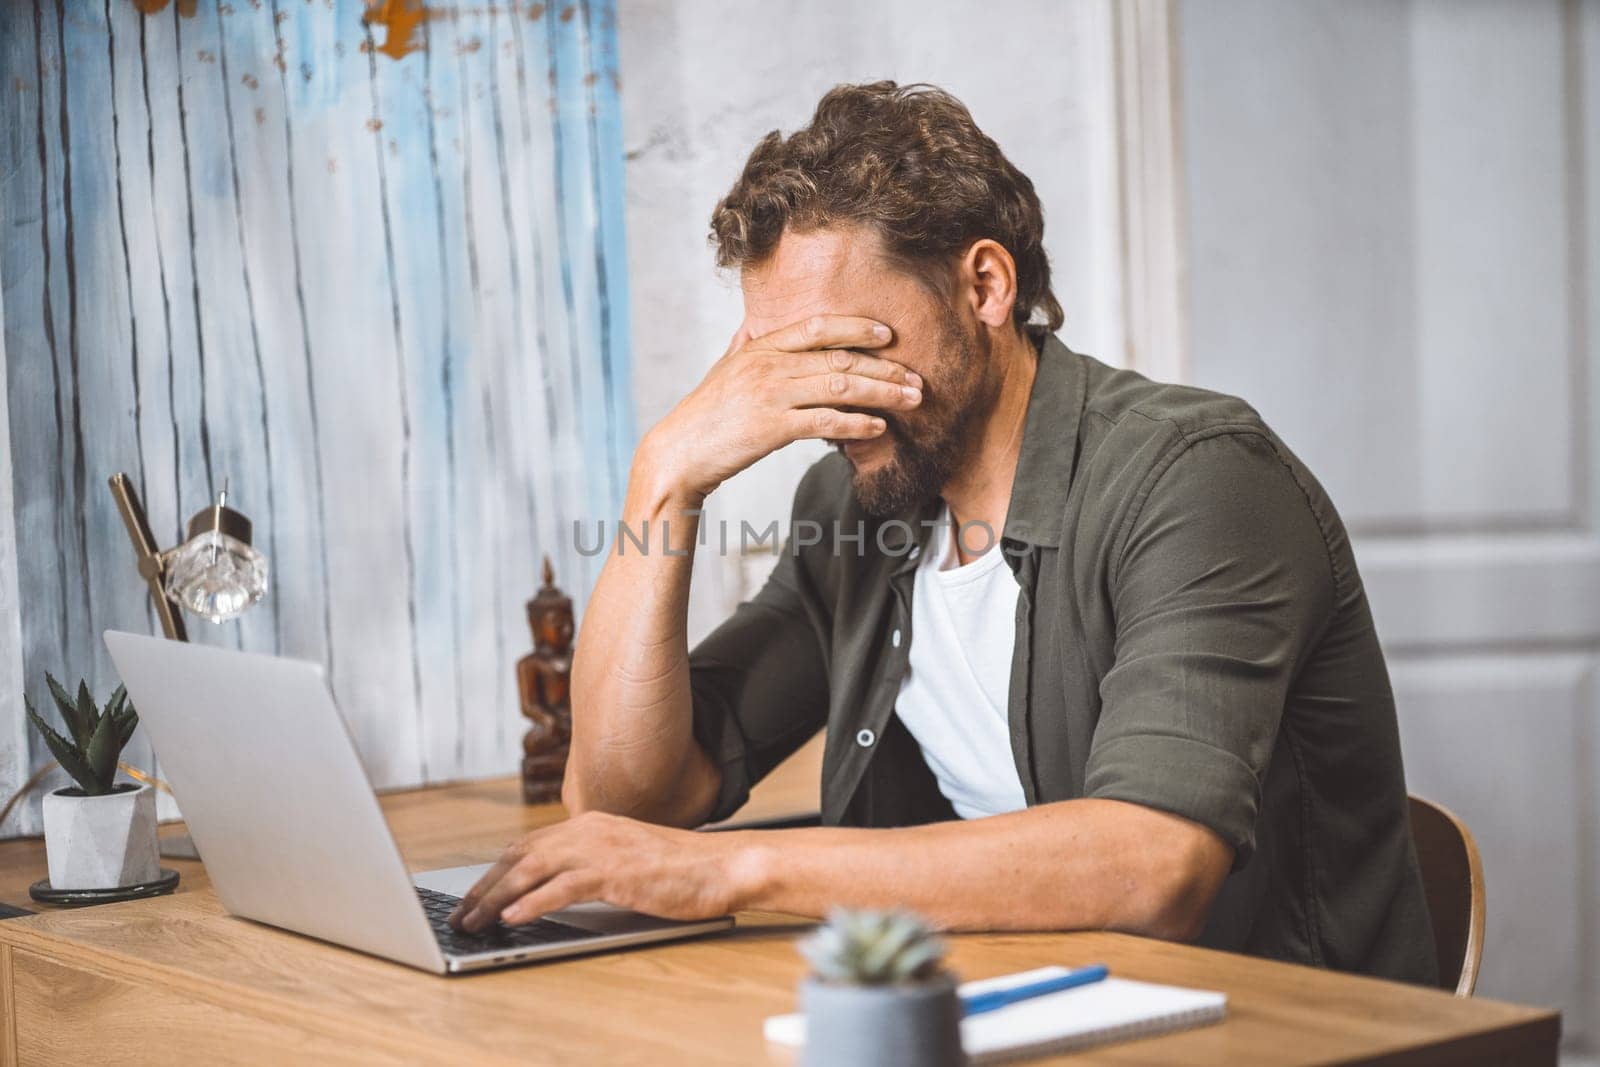 Man clearly overwhelmed and stressed out at work. His head in his hands, covering his face with palm, appearing to be in state of deep depression. Computer in front of him serves as a reminder of the pressures and deadlines he is facing, and the overall image portrays a feeling of burnout and exhaustion. by LipikStockMedia